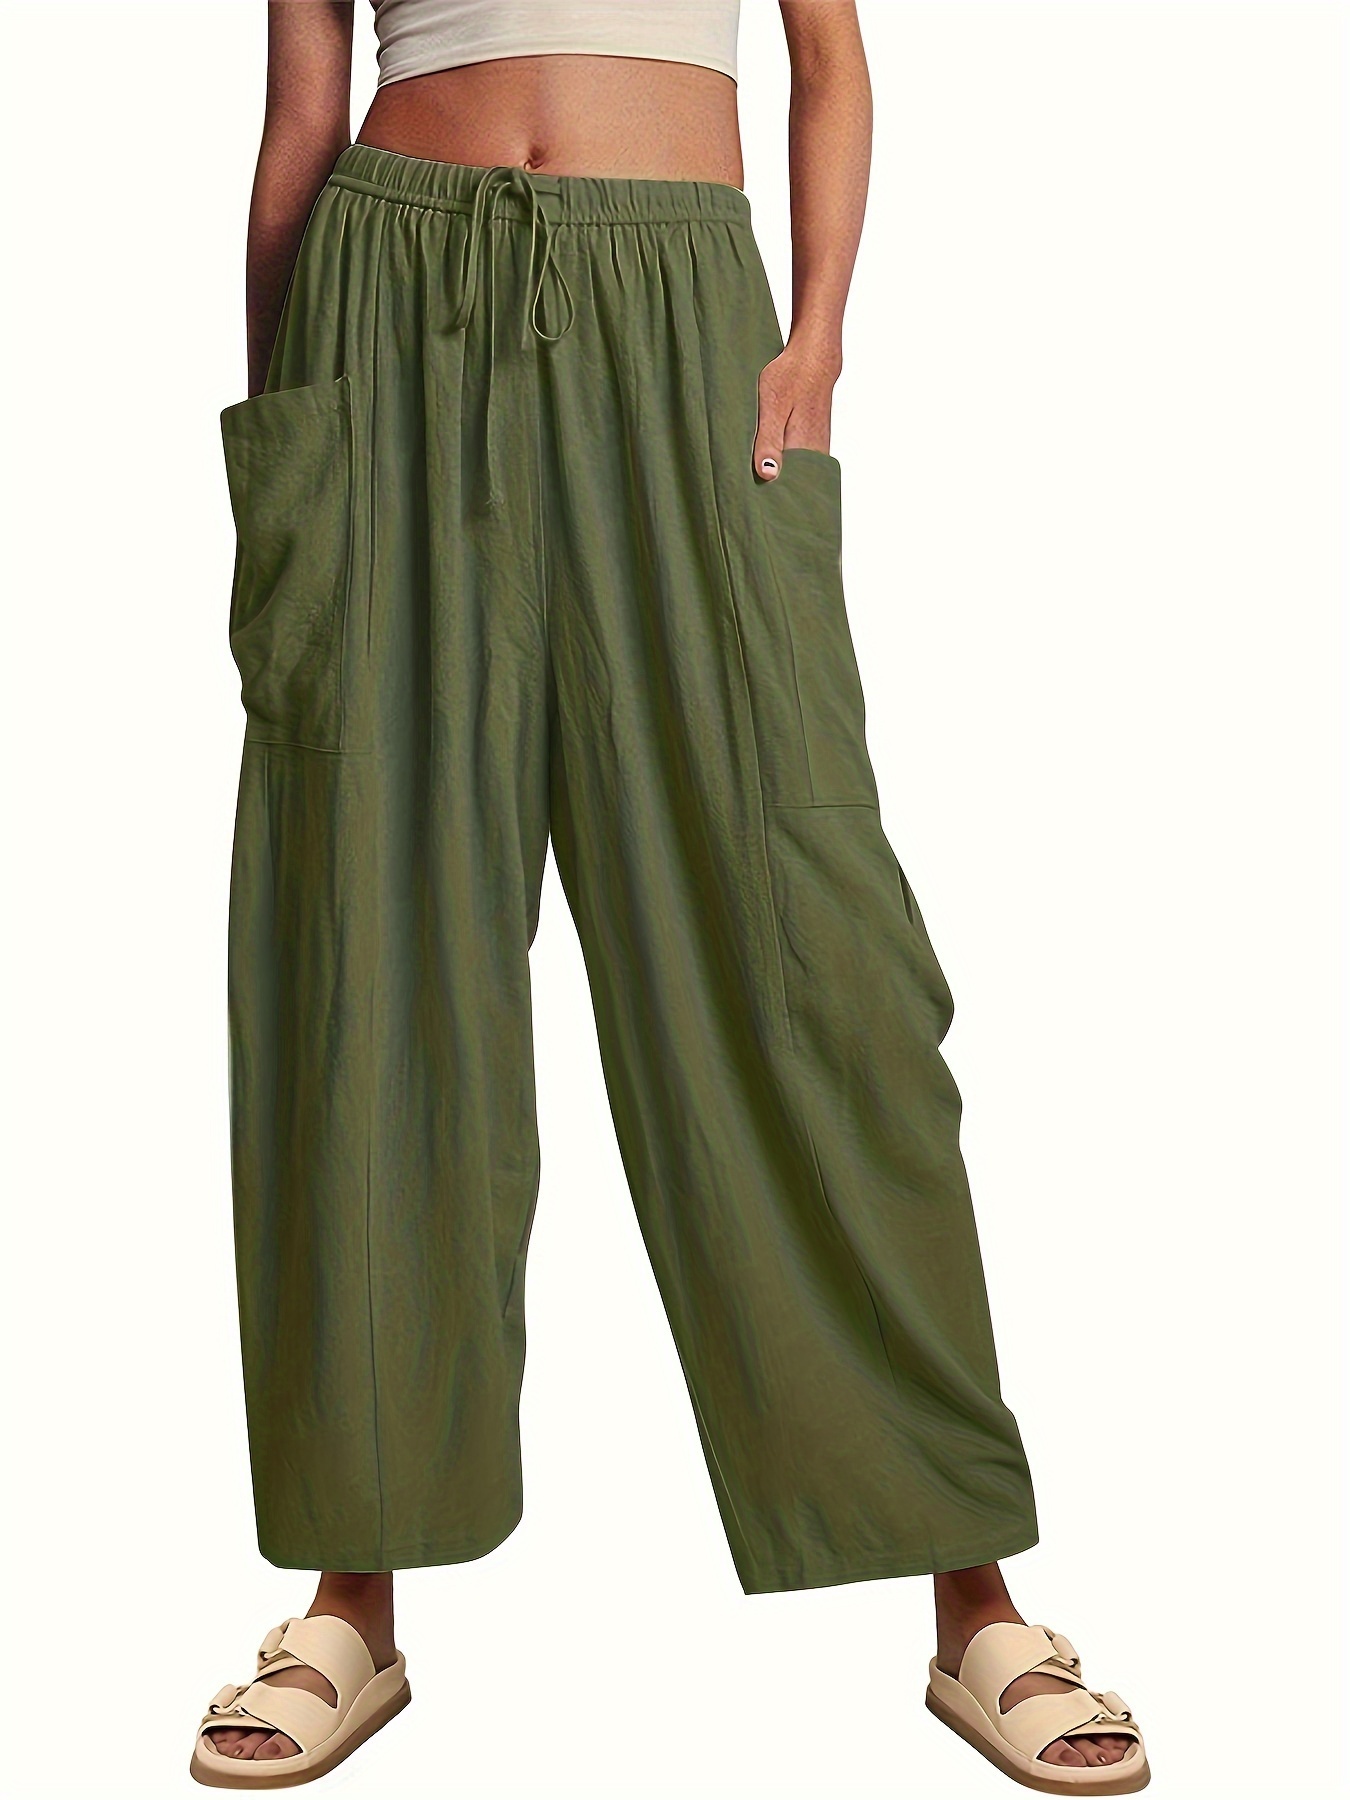 Solid Elastic Waist Flare Leg Pants, Casual Ruffle Pants For Spring & Fall,  Women's Clothing